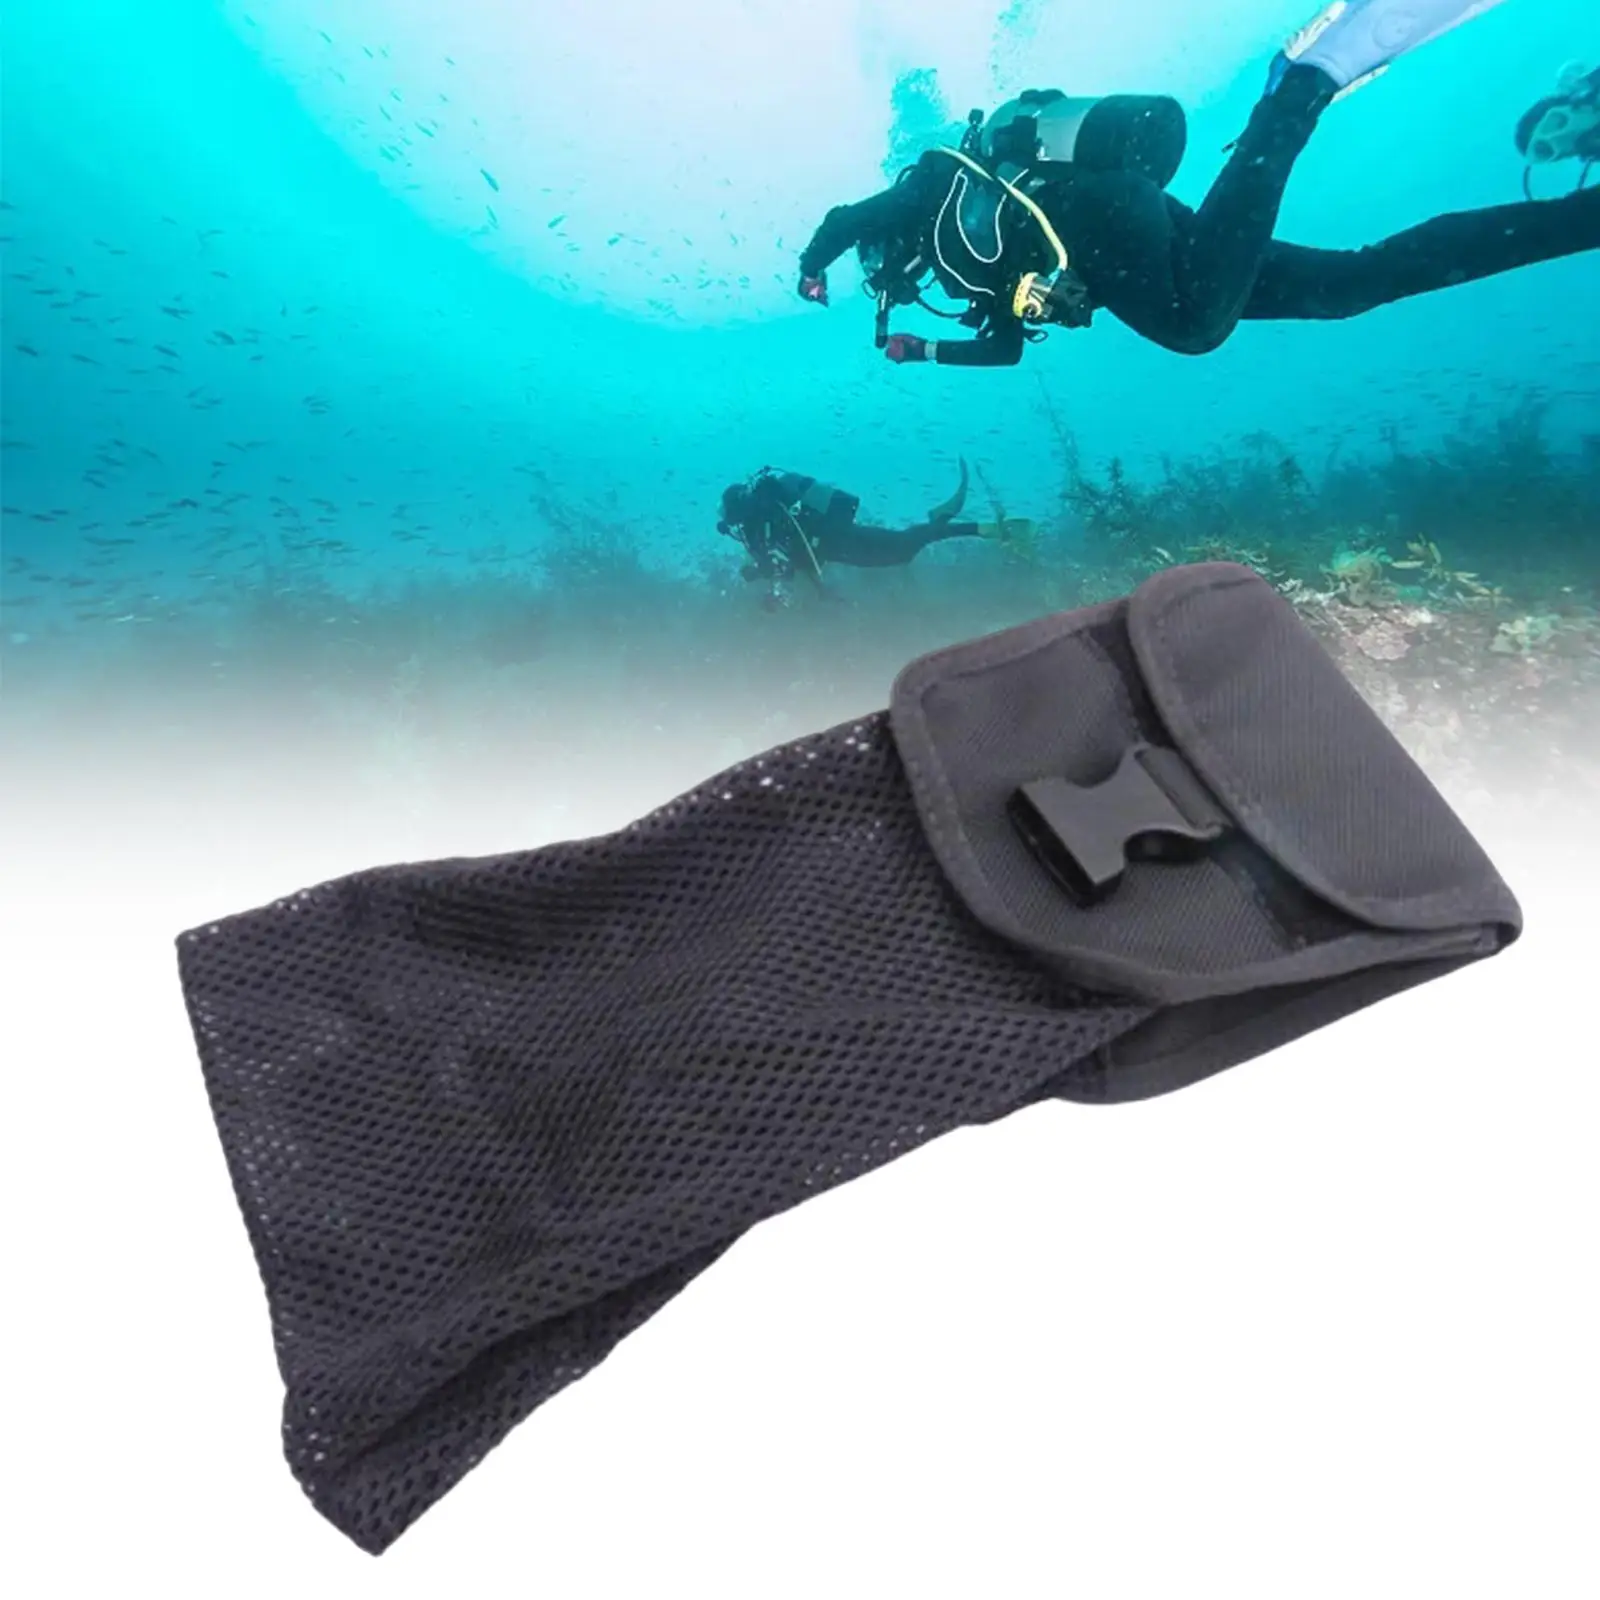 Scuba Diving Mesh Pouch Storage Holder with Bucklet Carry Gear Bag for Underwater Gears Dive Snorkel Keys Collecting Seashells